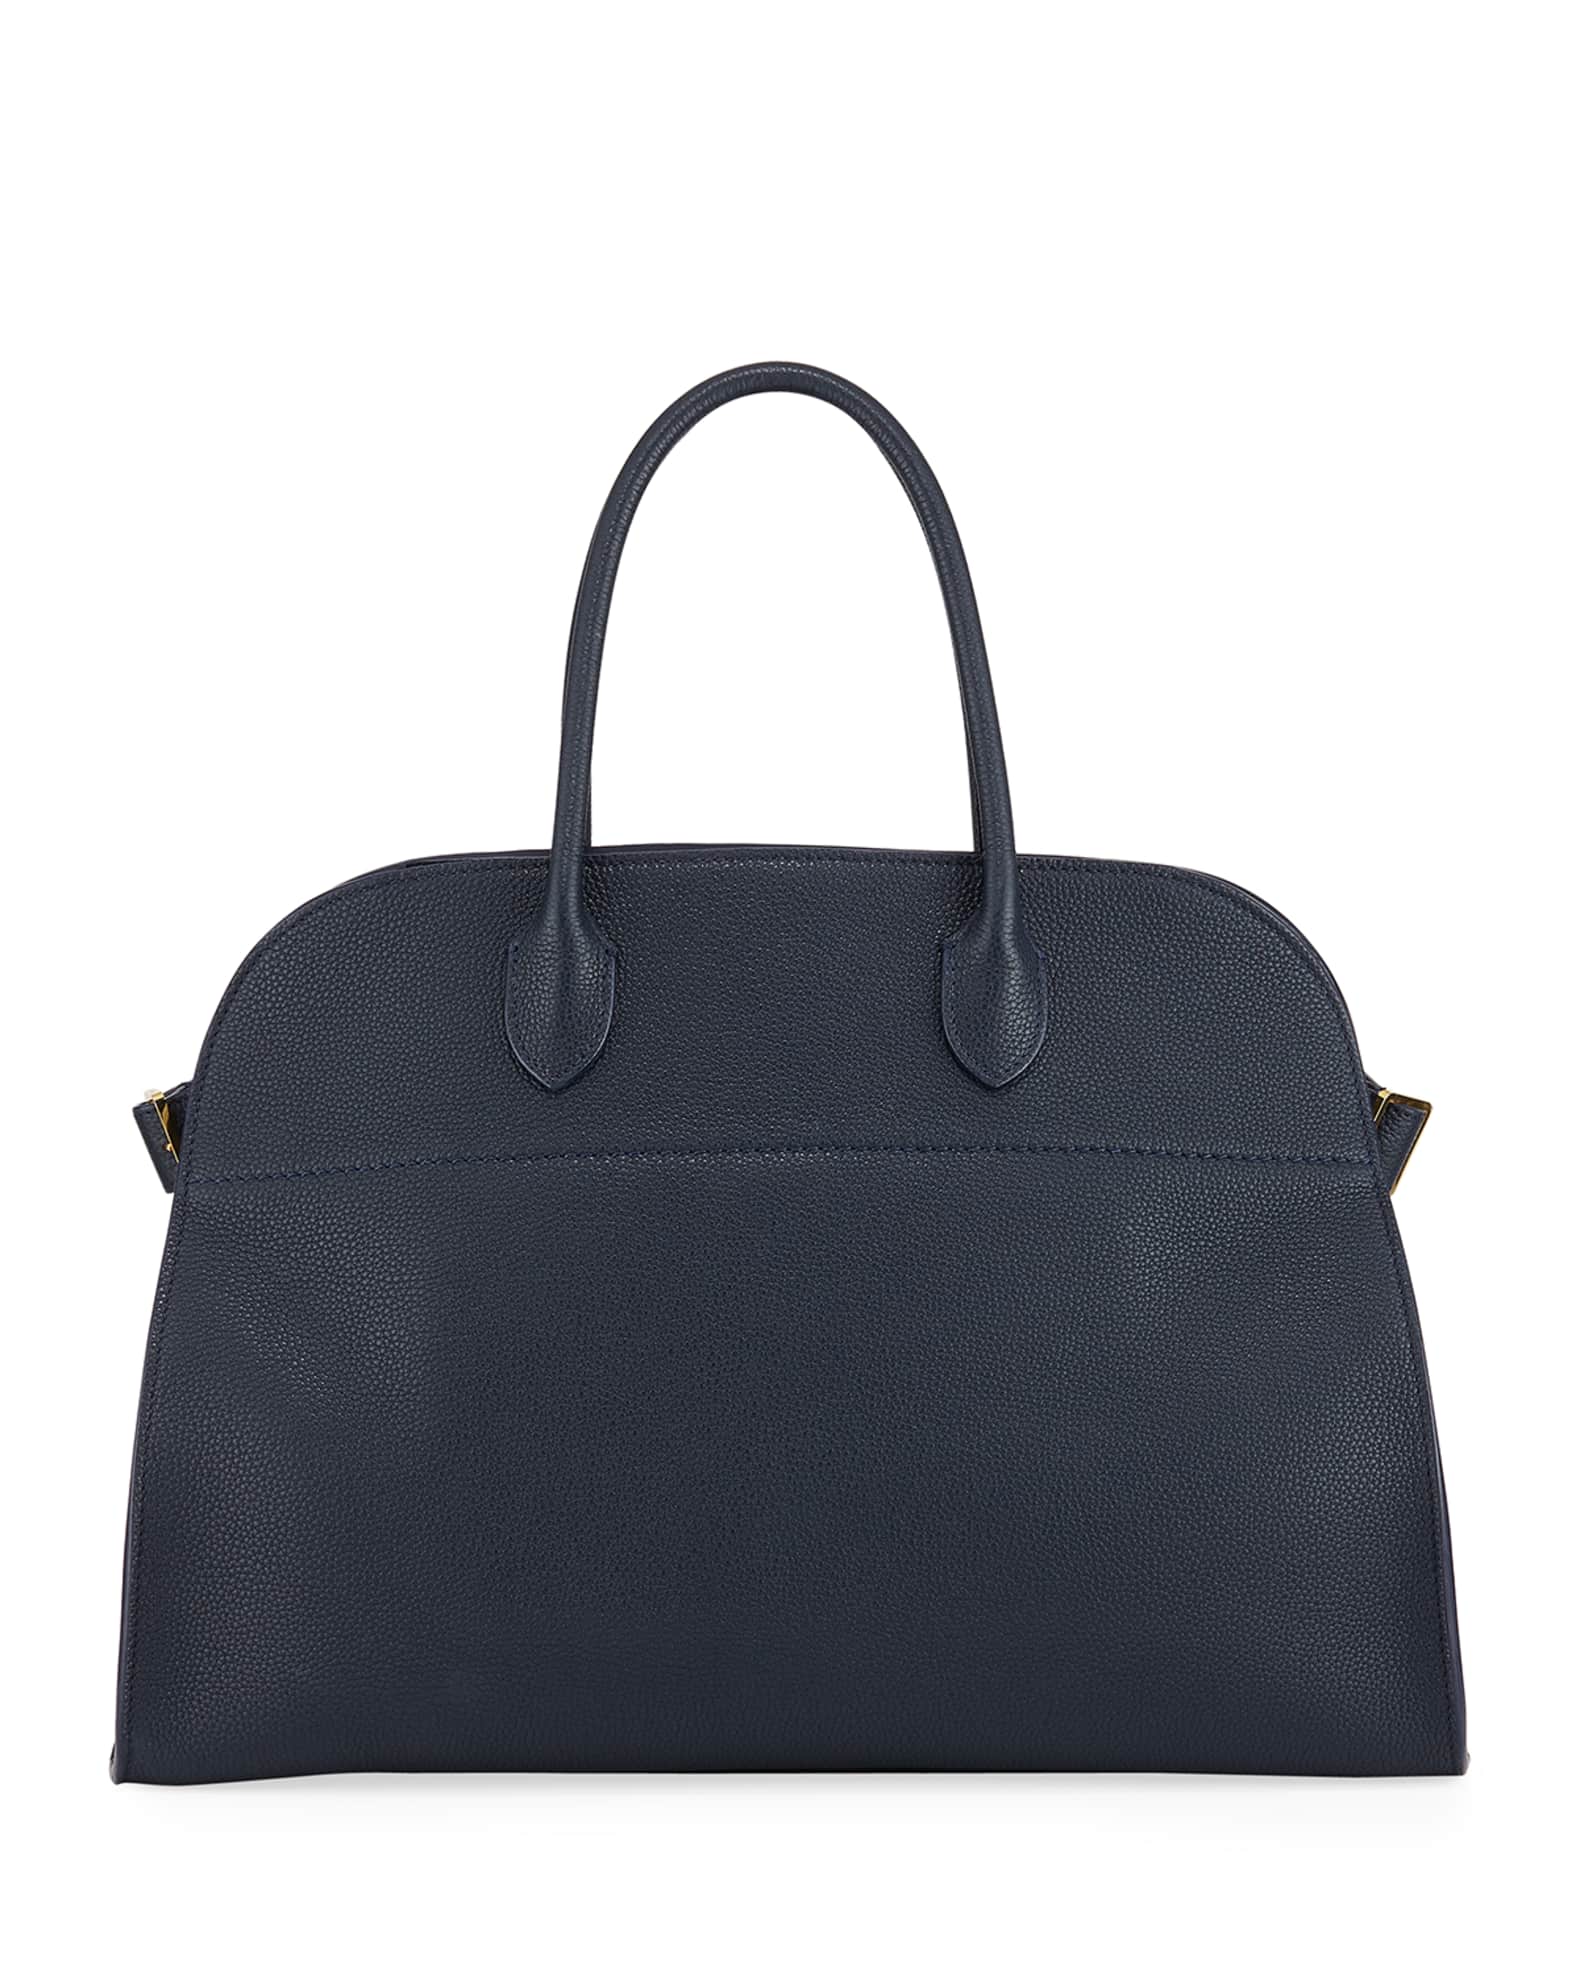 THE ROW Margaux 15 Bag in Grained Calfskin | Neiman Marcus